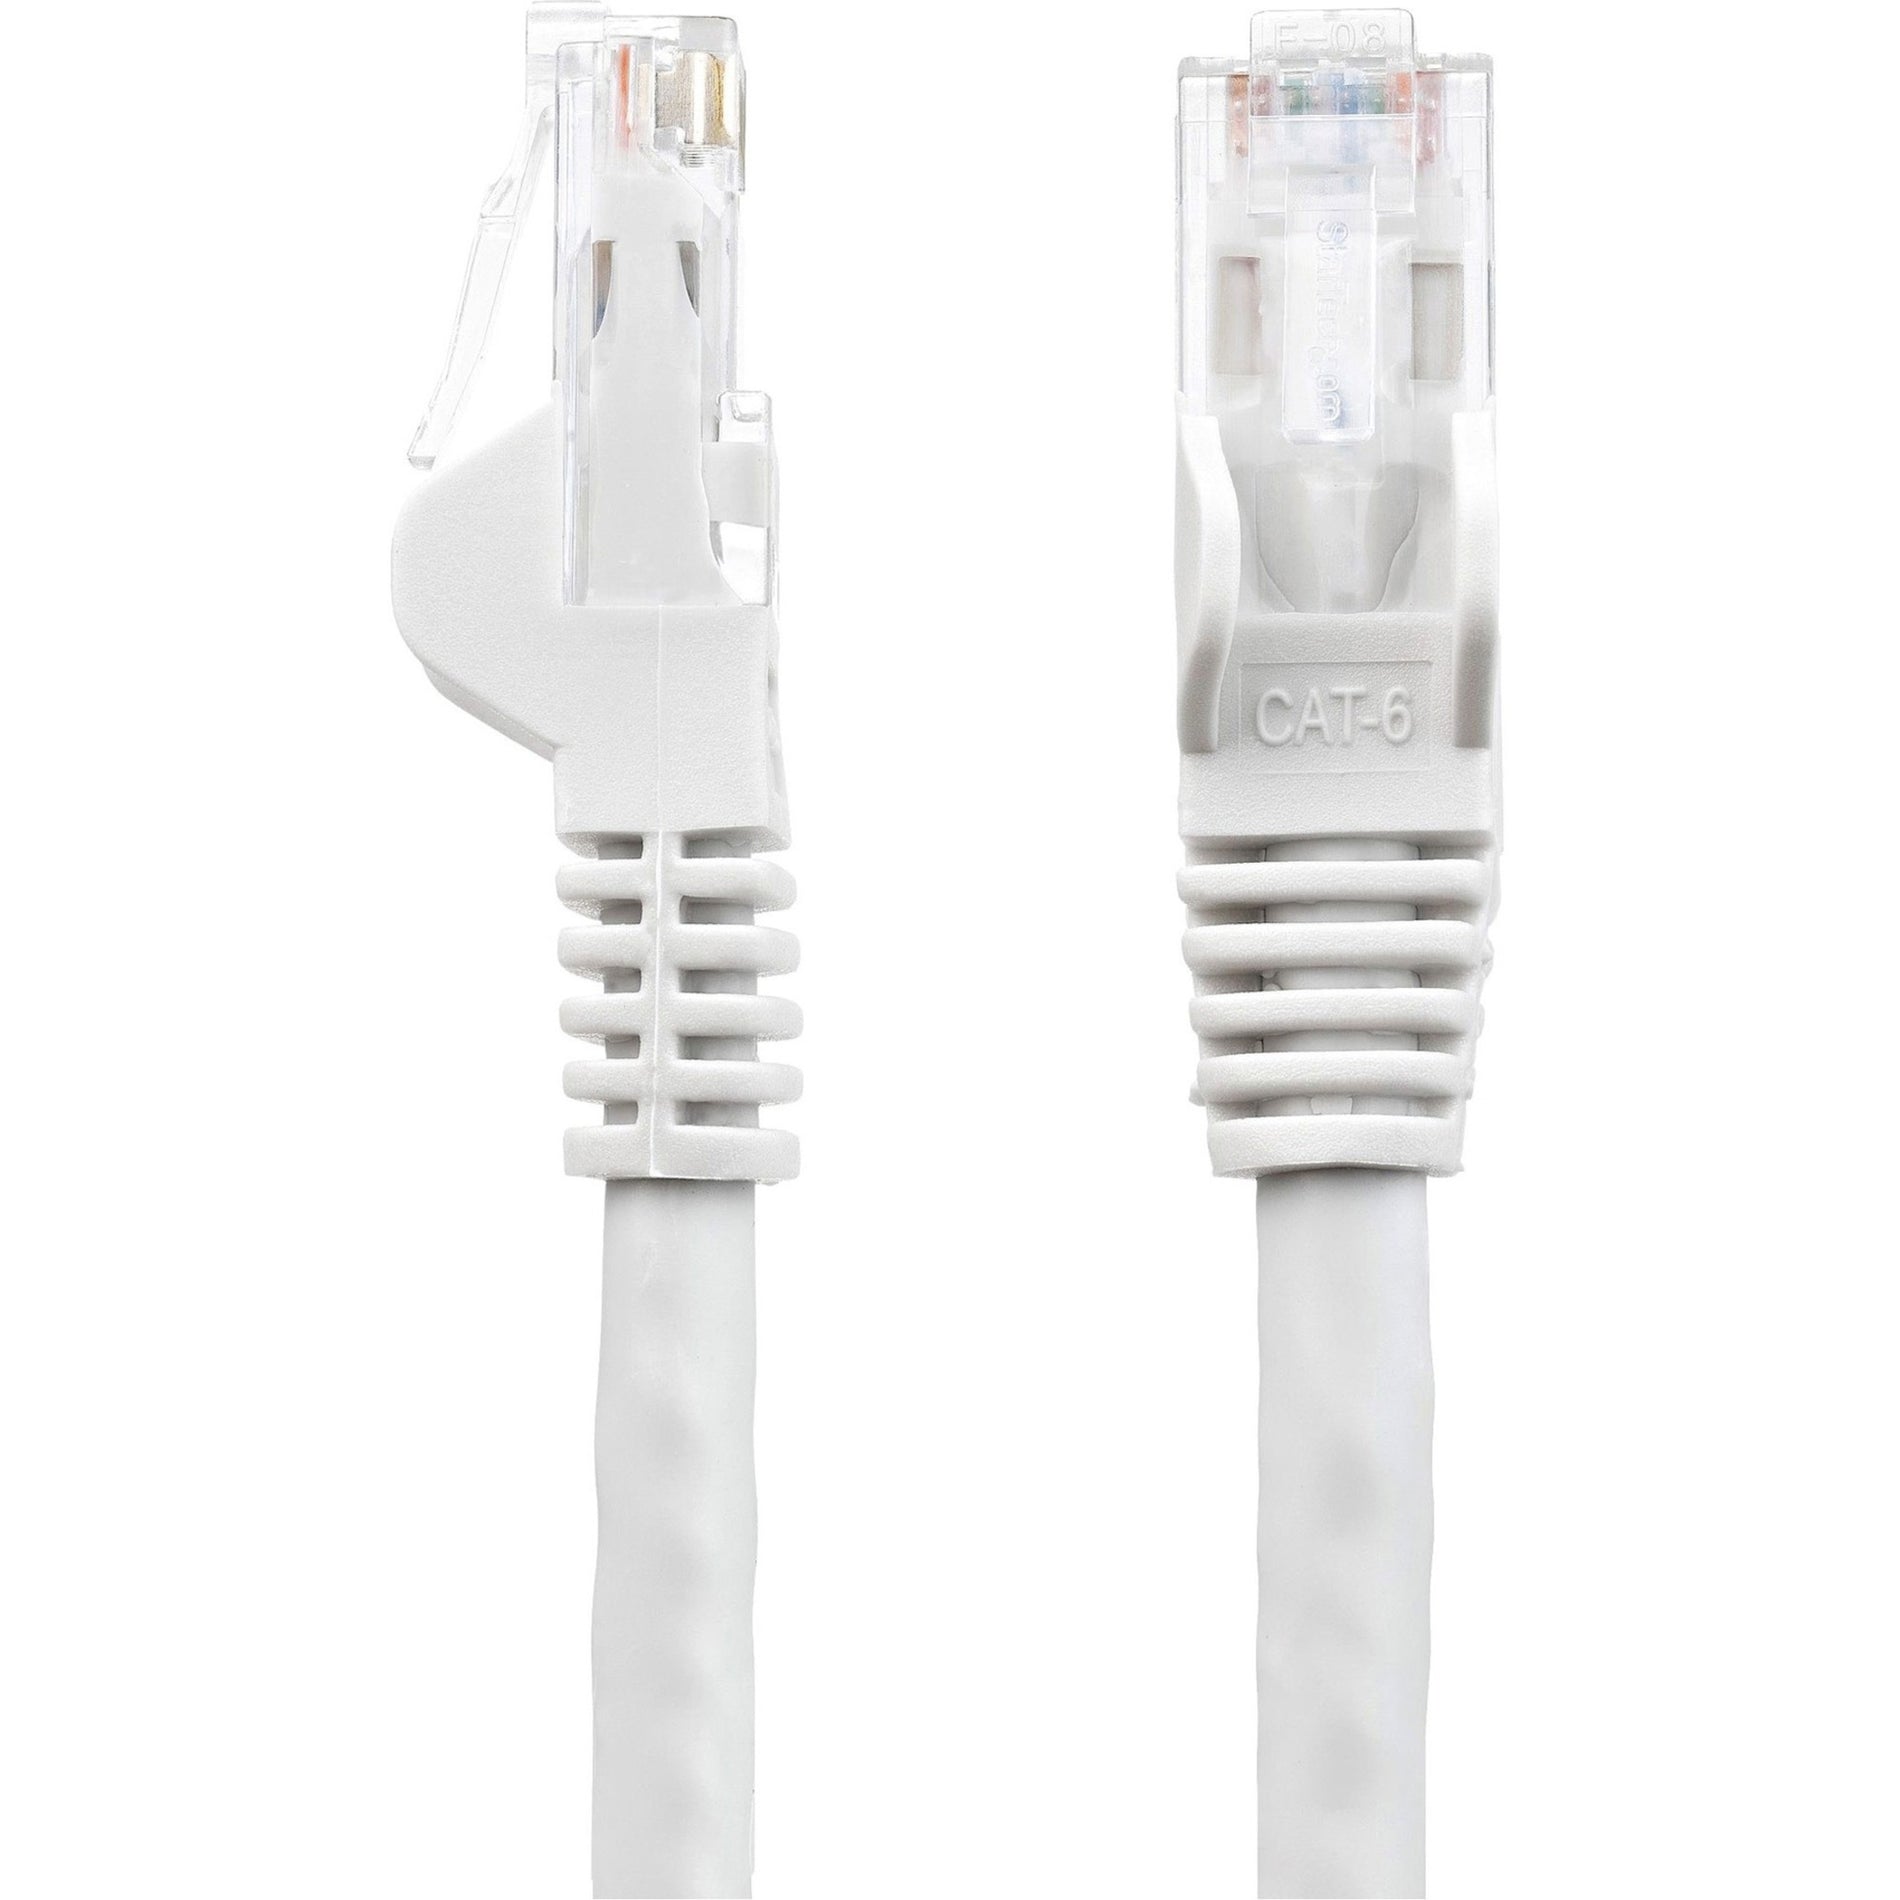 StarTech.com N6PATCH2WH Cat. 6 Network Cable, 2ft White Cat6 Patch Cable with Snagless RJ45 Connectors, Ethernet Cable